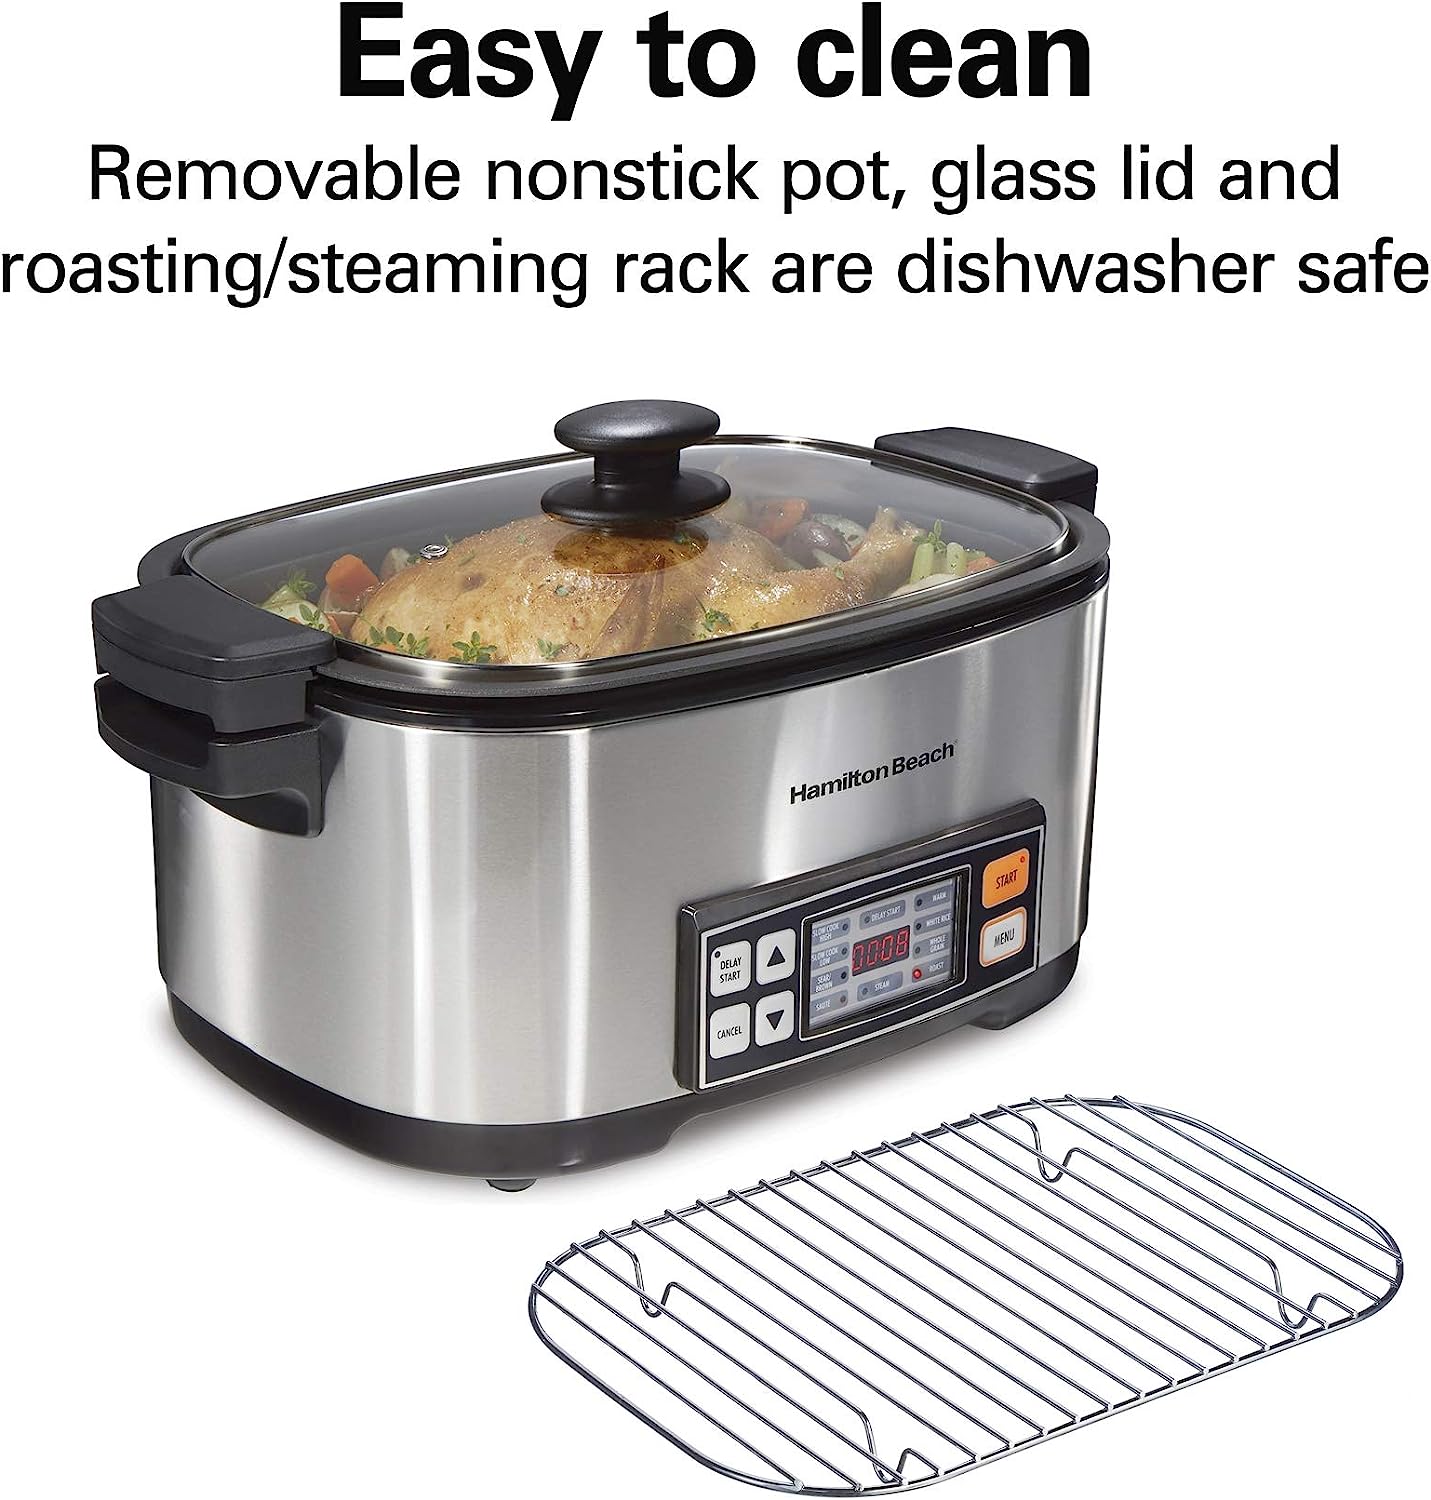 https://bigbigmart.com/wp-content/uploads/2023/07/Hamilton-Beach-9-in-1-Digital-Programmable-Slow-Cooker-with-6-quart-Nonstick-Crock-Sear-Saute-Steam-Rice-Functions-Stainless-Steel-330659.jpg